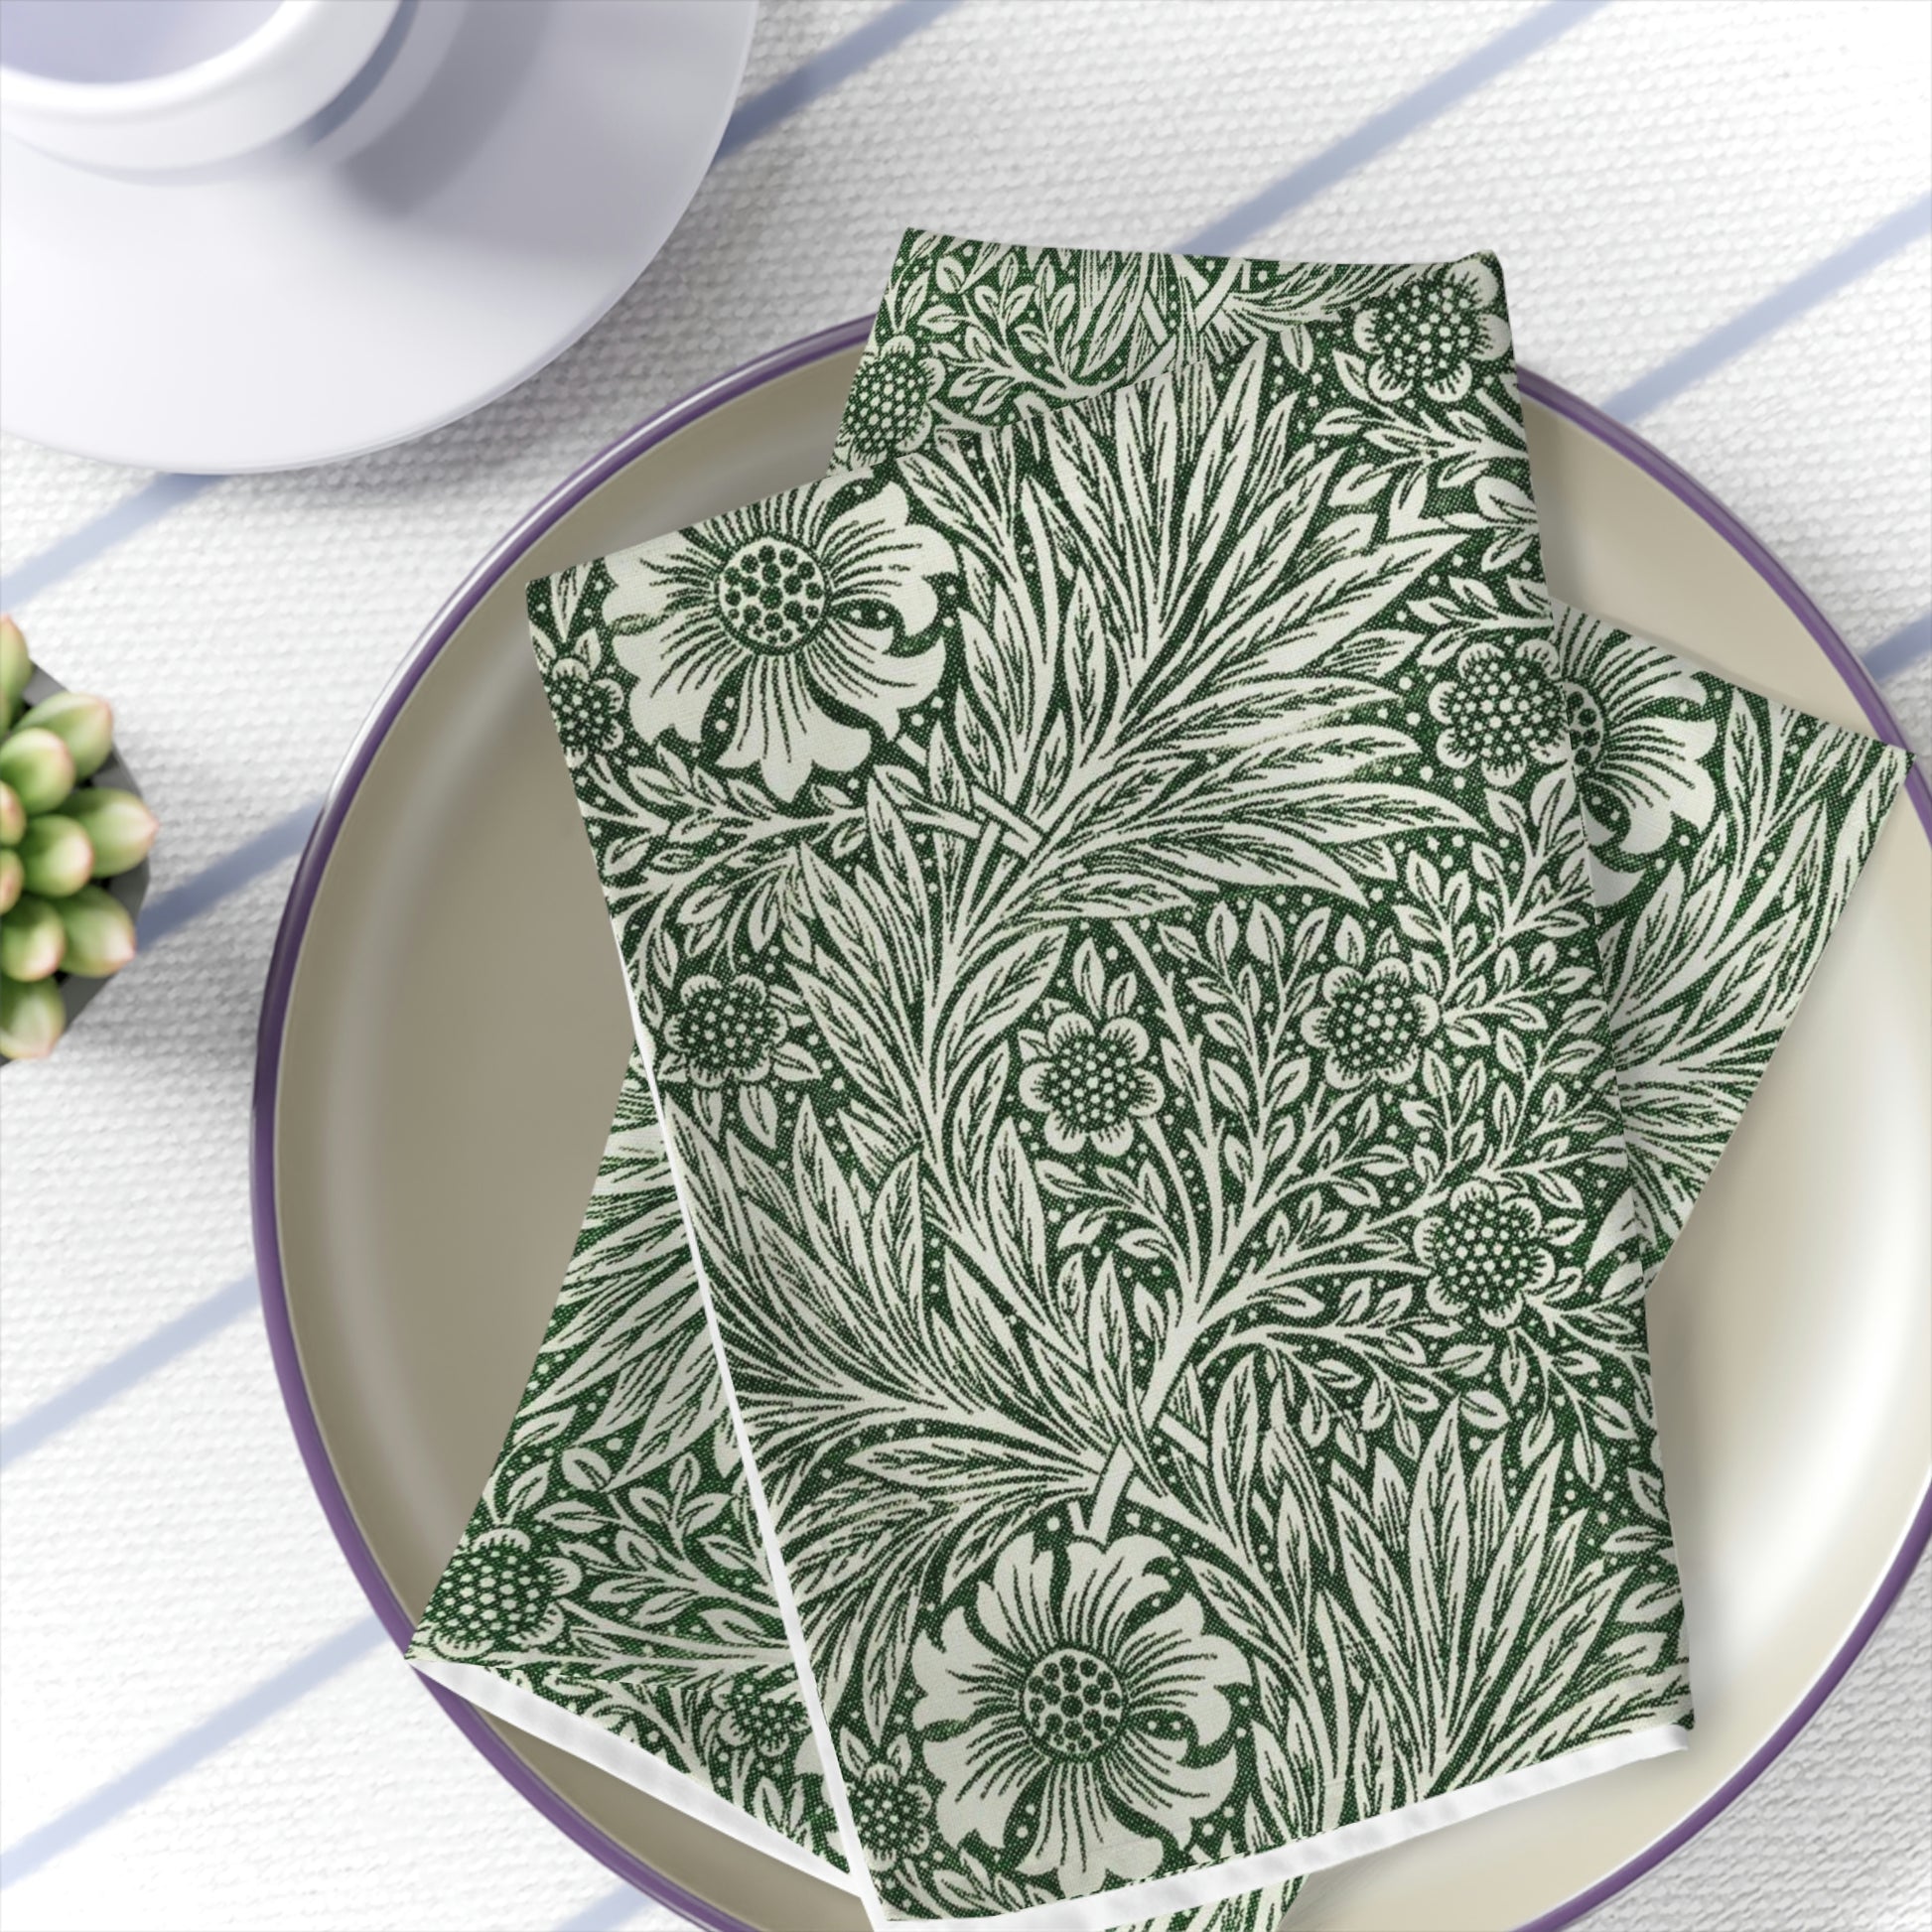 William-Morris-&-Co-Table-Napkins-Marigold-Collection-4